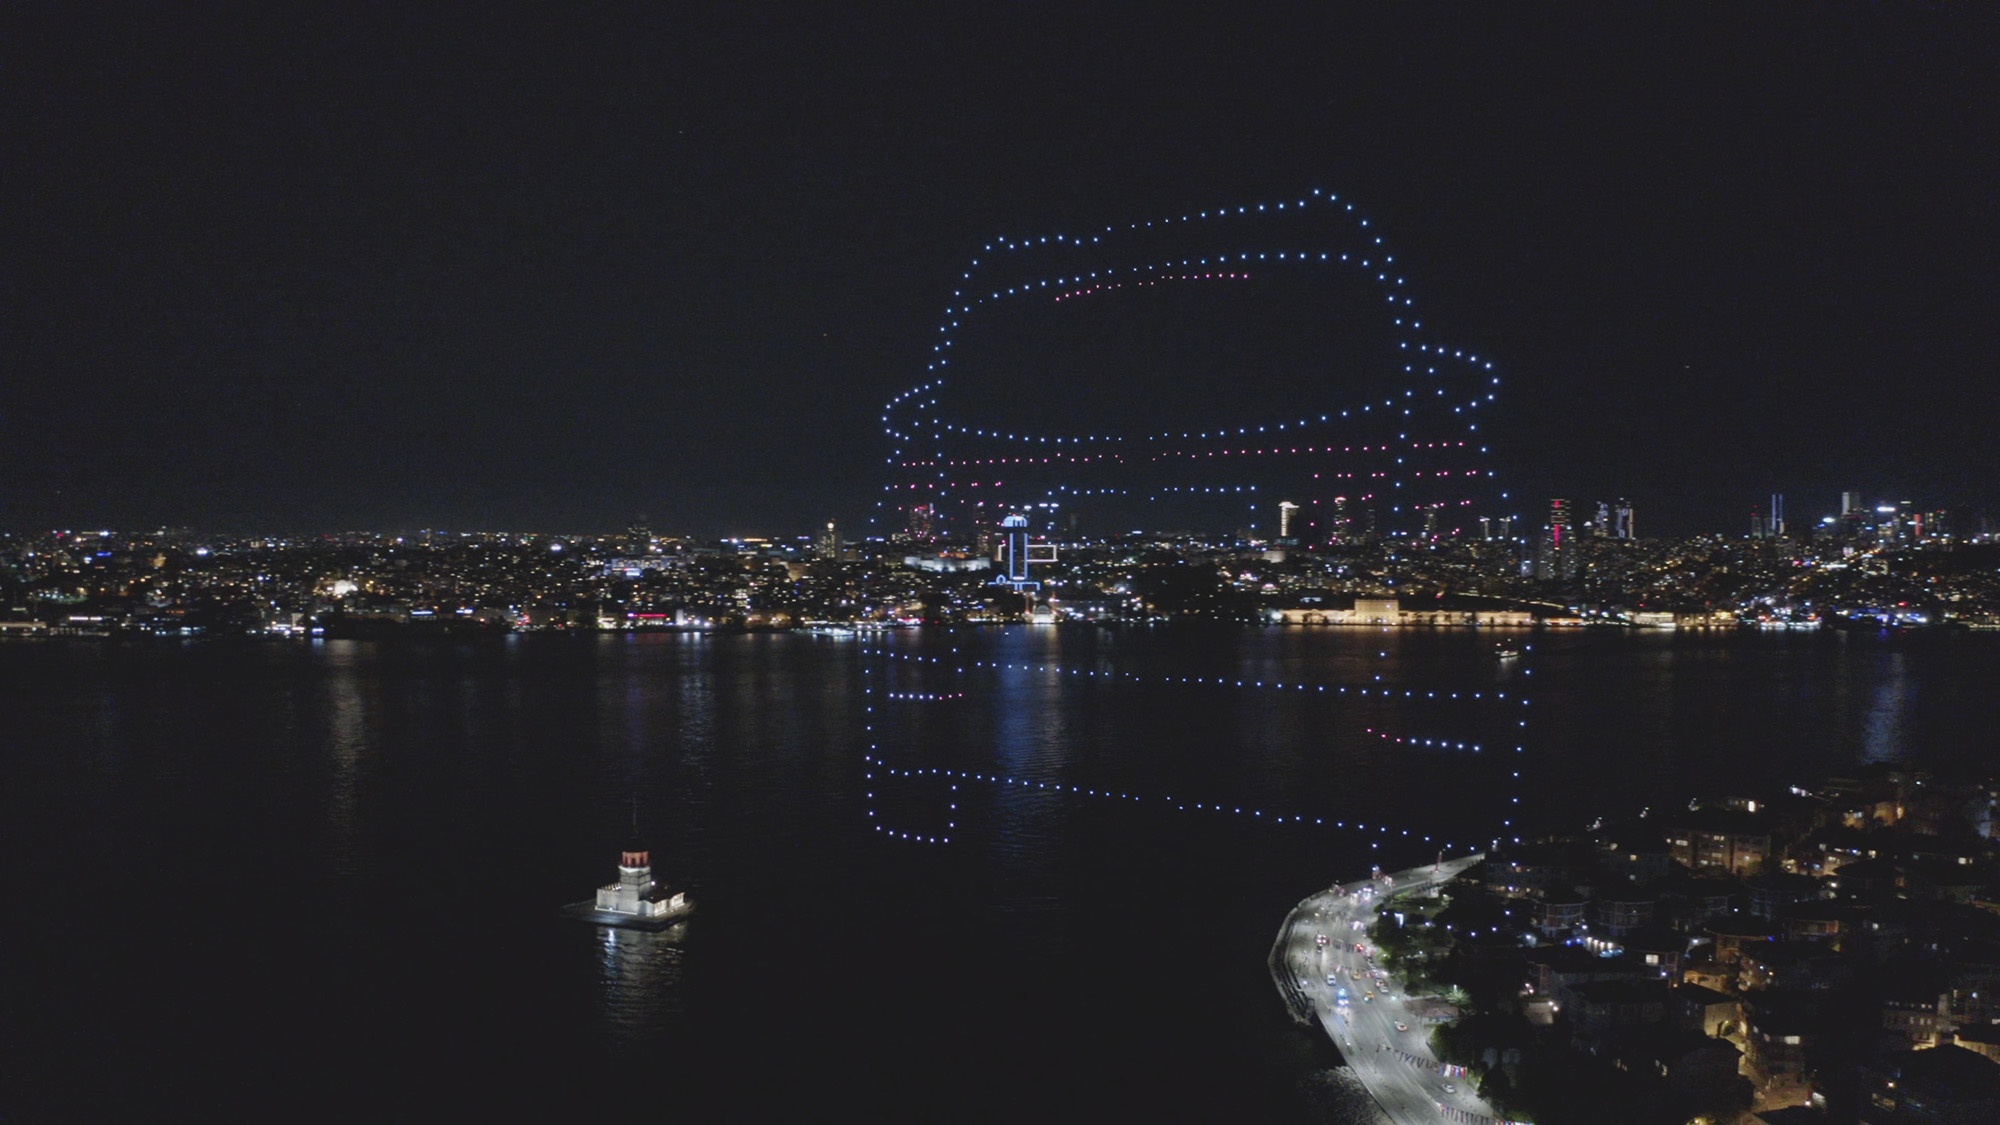 Read more about the article Enchanting Light Show Staged Featuring 500 Drones Over Istanbul Sky